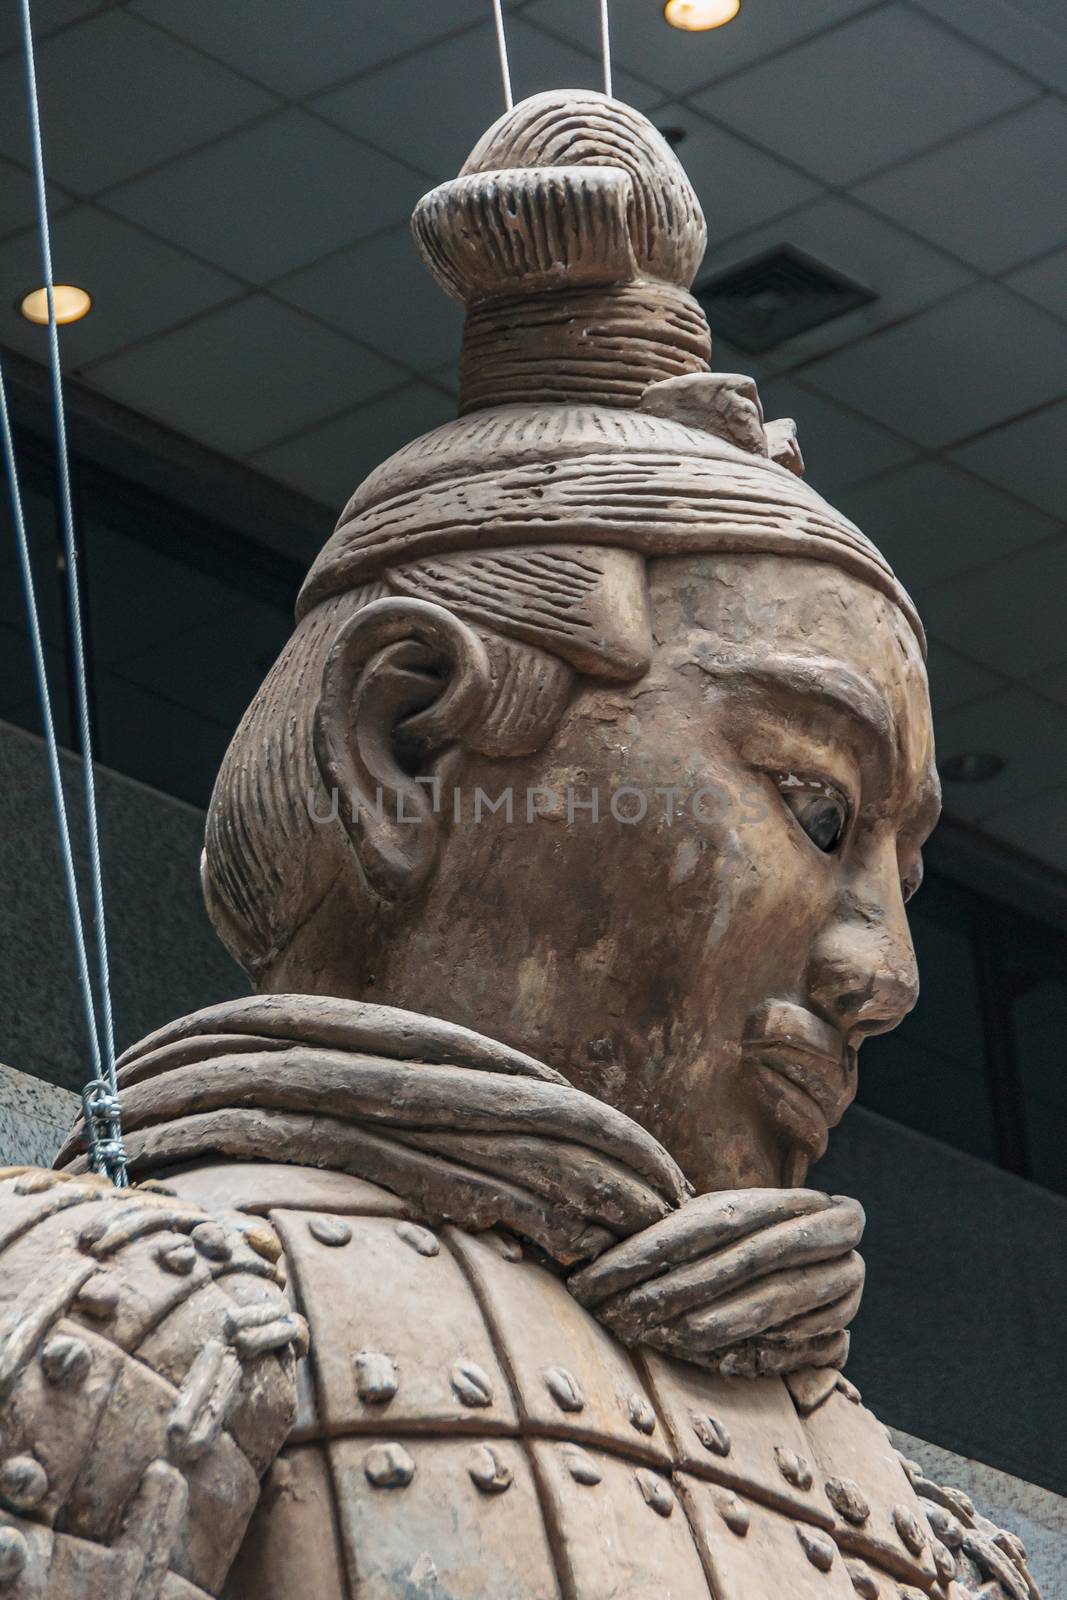 Xian, China - May 1, 2010: Terracotta Army museuml.  Head closeup of Giant light brown sculpture of officer in style. Ceiling as backdrop.